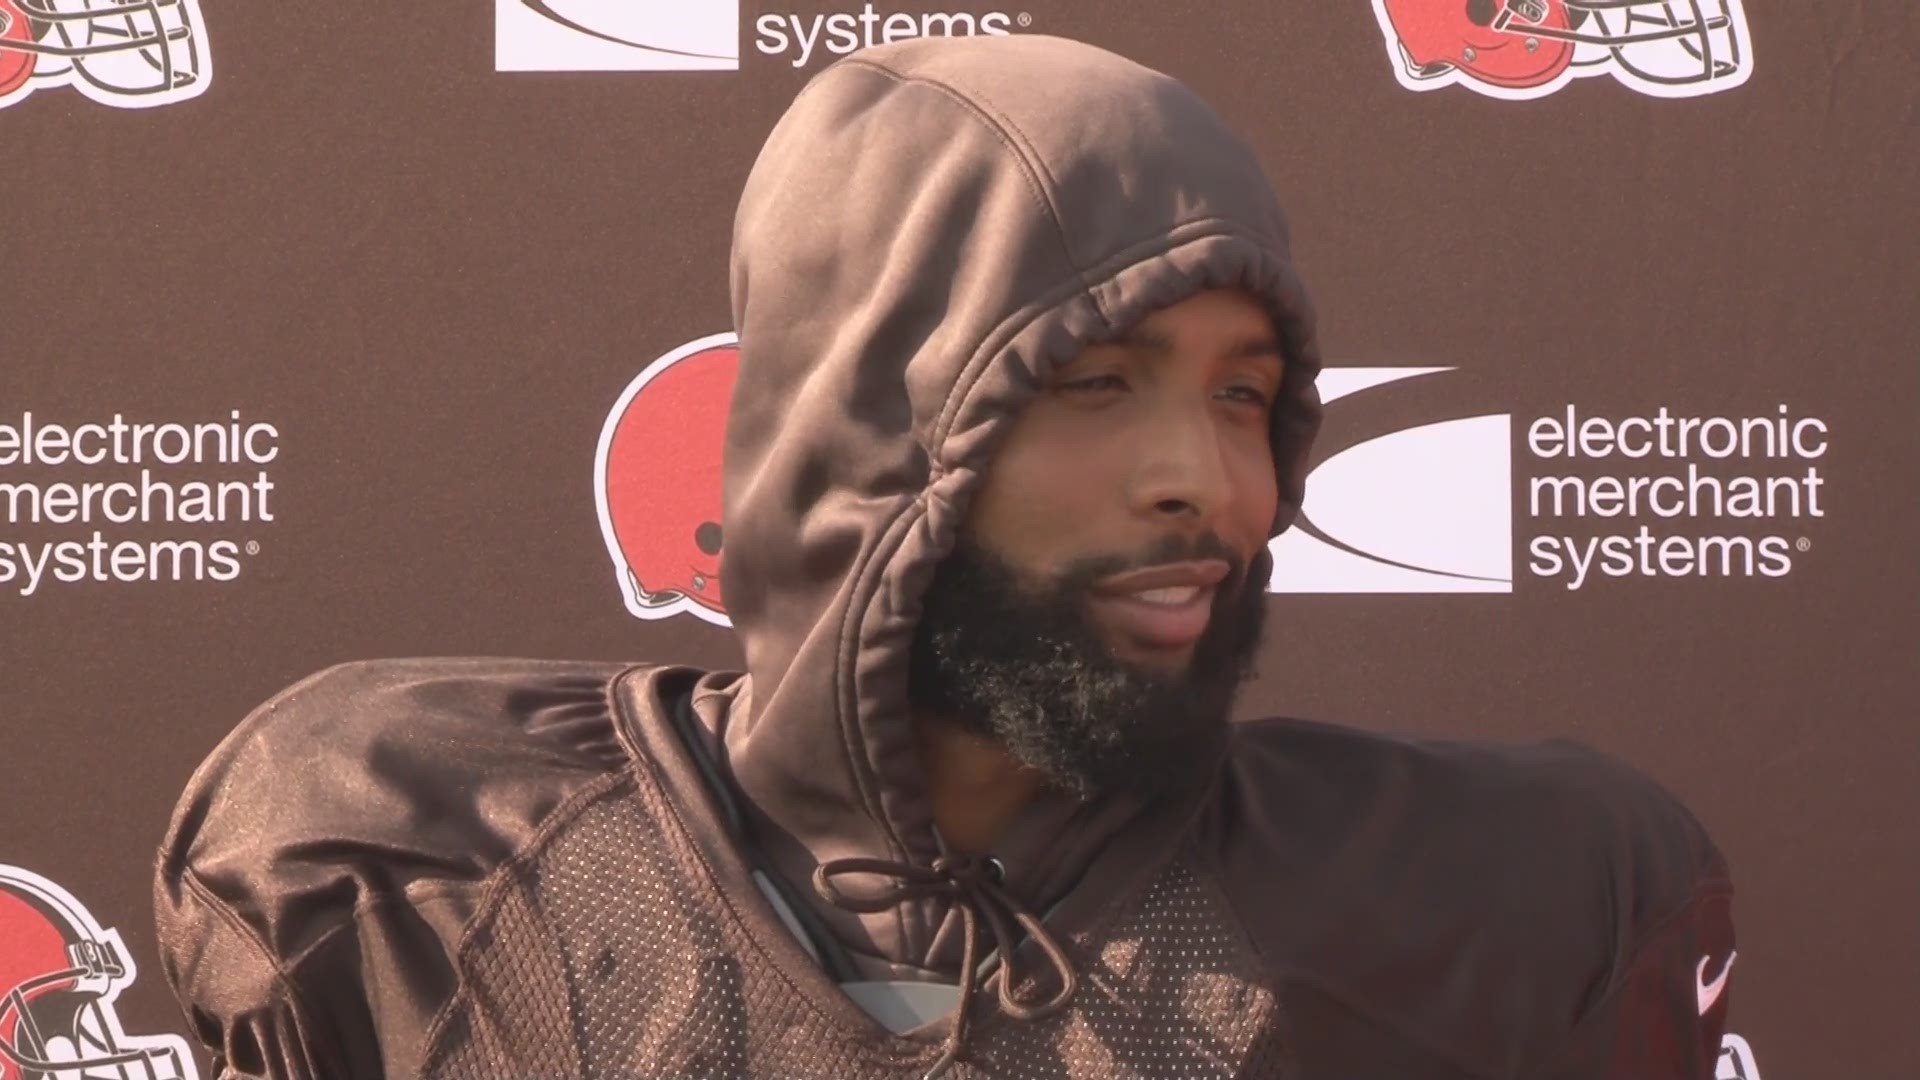 Browns receiver Odell Beckham Jr. says he's not concerned about the hip injury that kept him out of team drills in joint practices with the Colts. OBJ says he plans to play in Cleveland's season opener on Sept. 8th versus Tennessee.